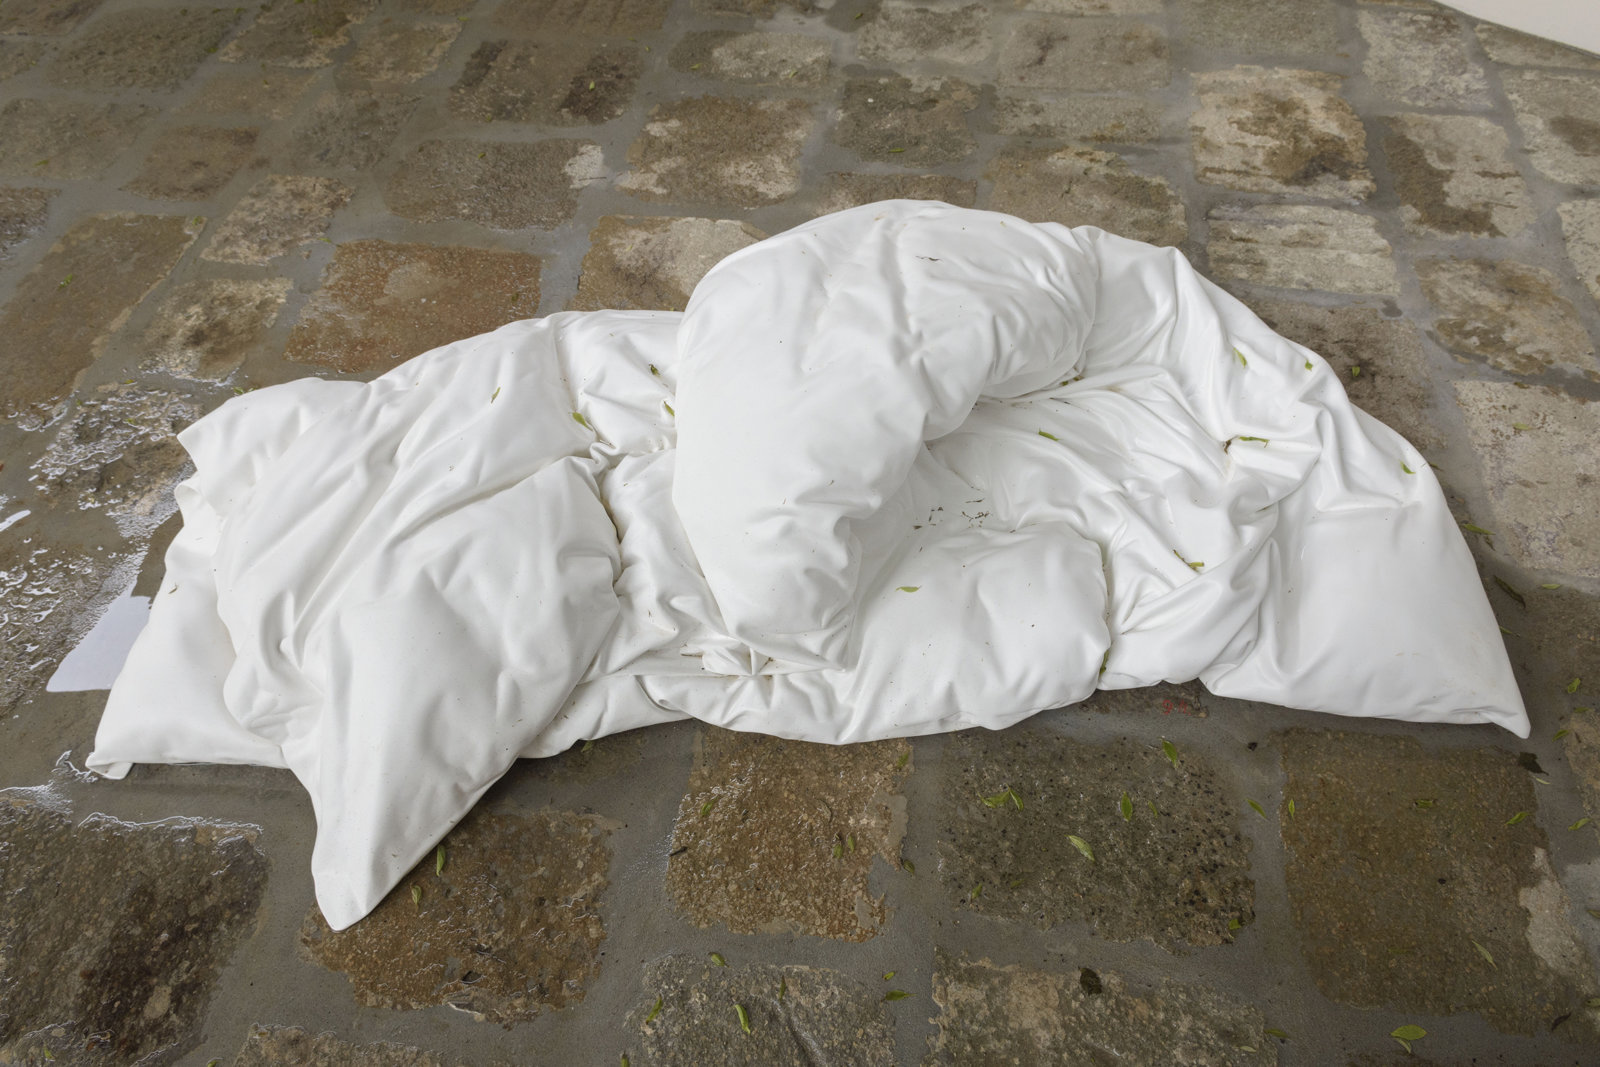 Geoffrey Farmer, Duvet, 2017, cast aluminum, waterworks, 28 x 47 x 79 in. (70 x 120 x 200 cm). Installation view, A way out of the mirror, Canada Pavilion, 57th Venice Biennale, Venice, Italy